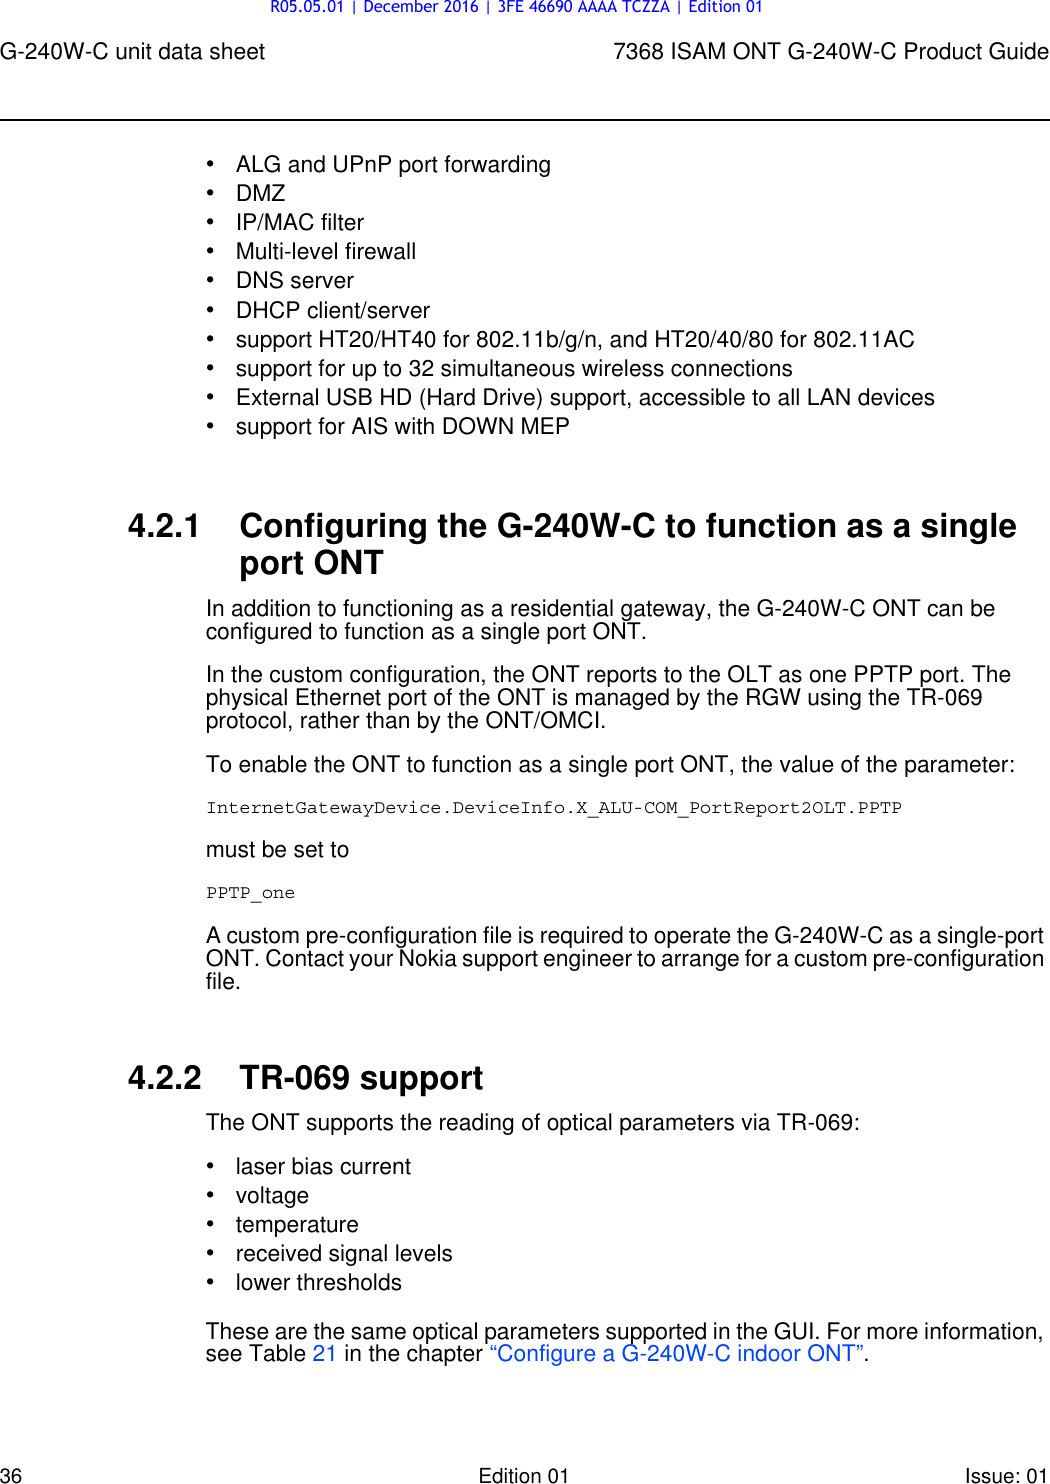 Page 36 of Nokia Bell G240W-C GPON ONU User Manual 7368 ISAM ONT G 240W B Product Guide